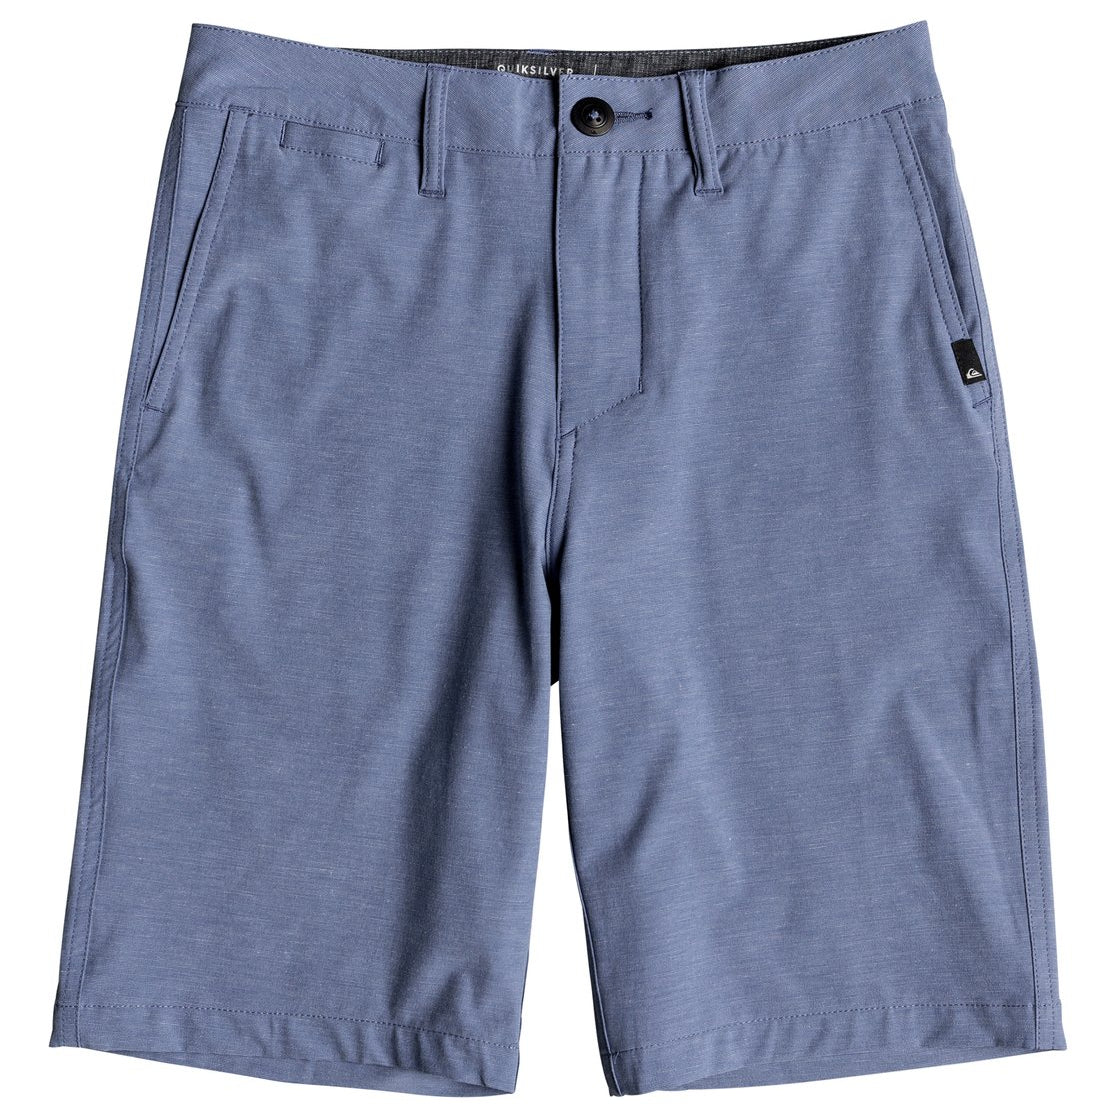 Quiksilver Union Heather 19in Youth Amphibian Shorts BNG0 27